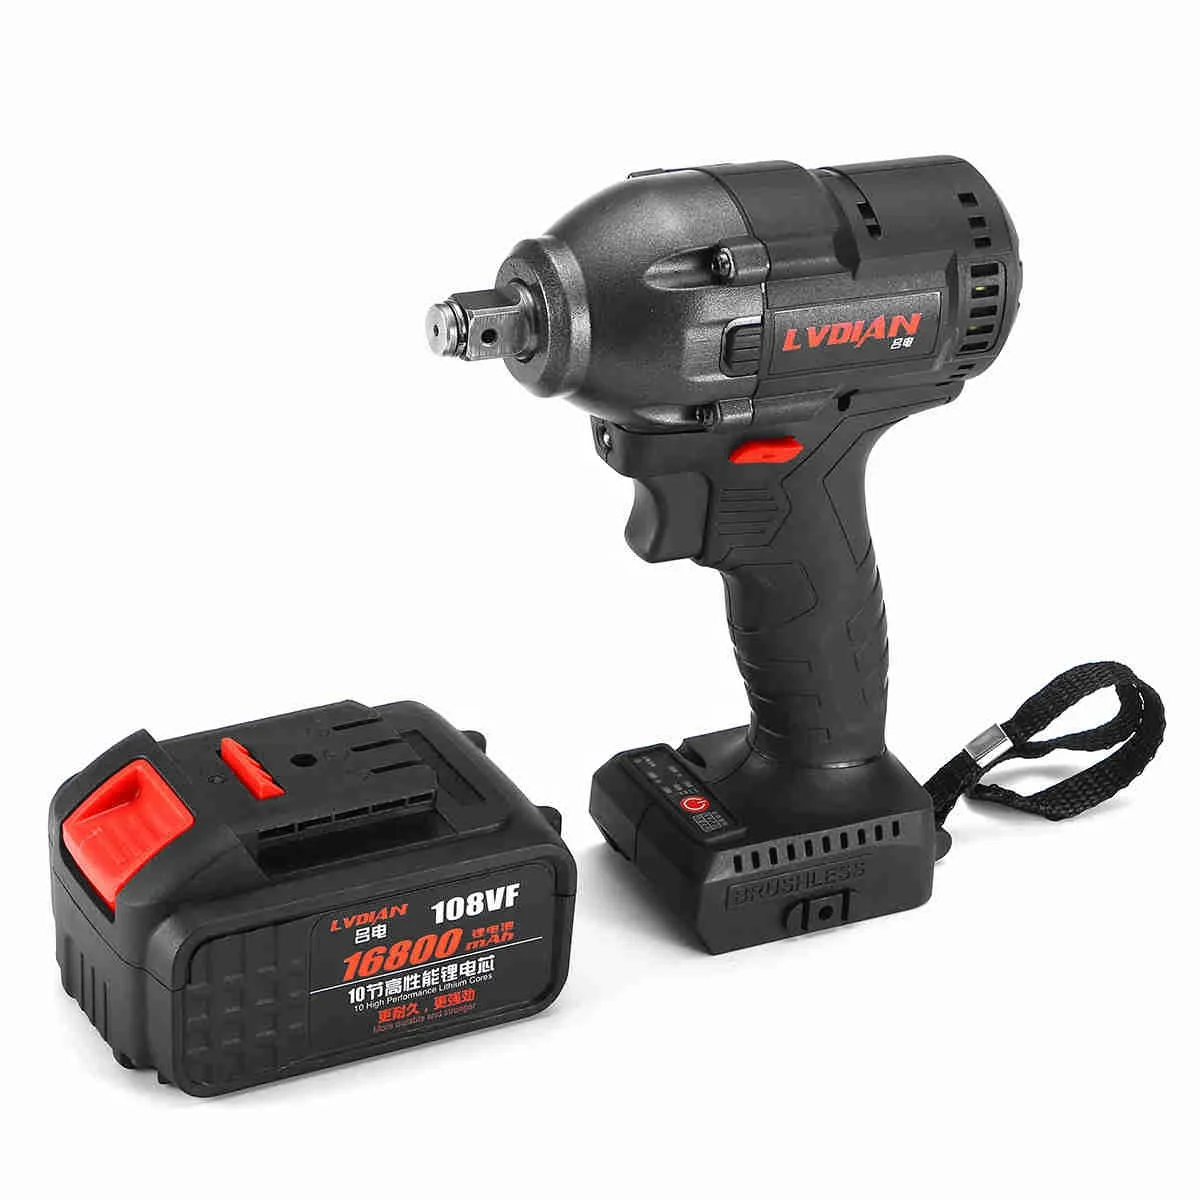 Brushless Electric Wrench Store, 55% OFF | www.ingeniovirtual.com